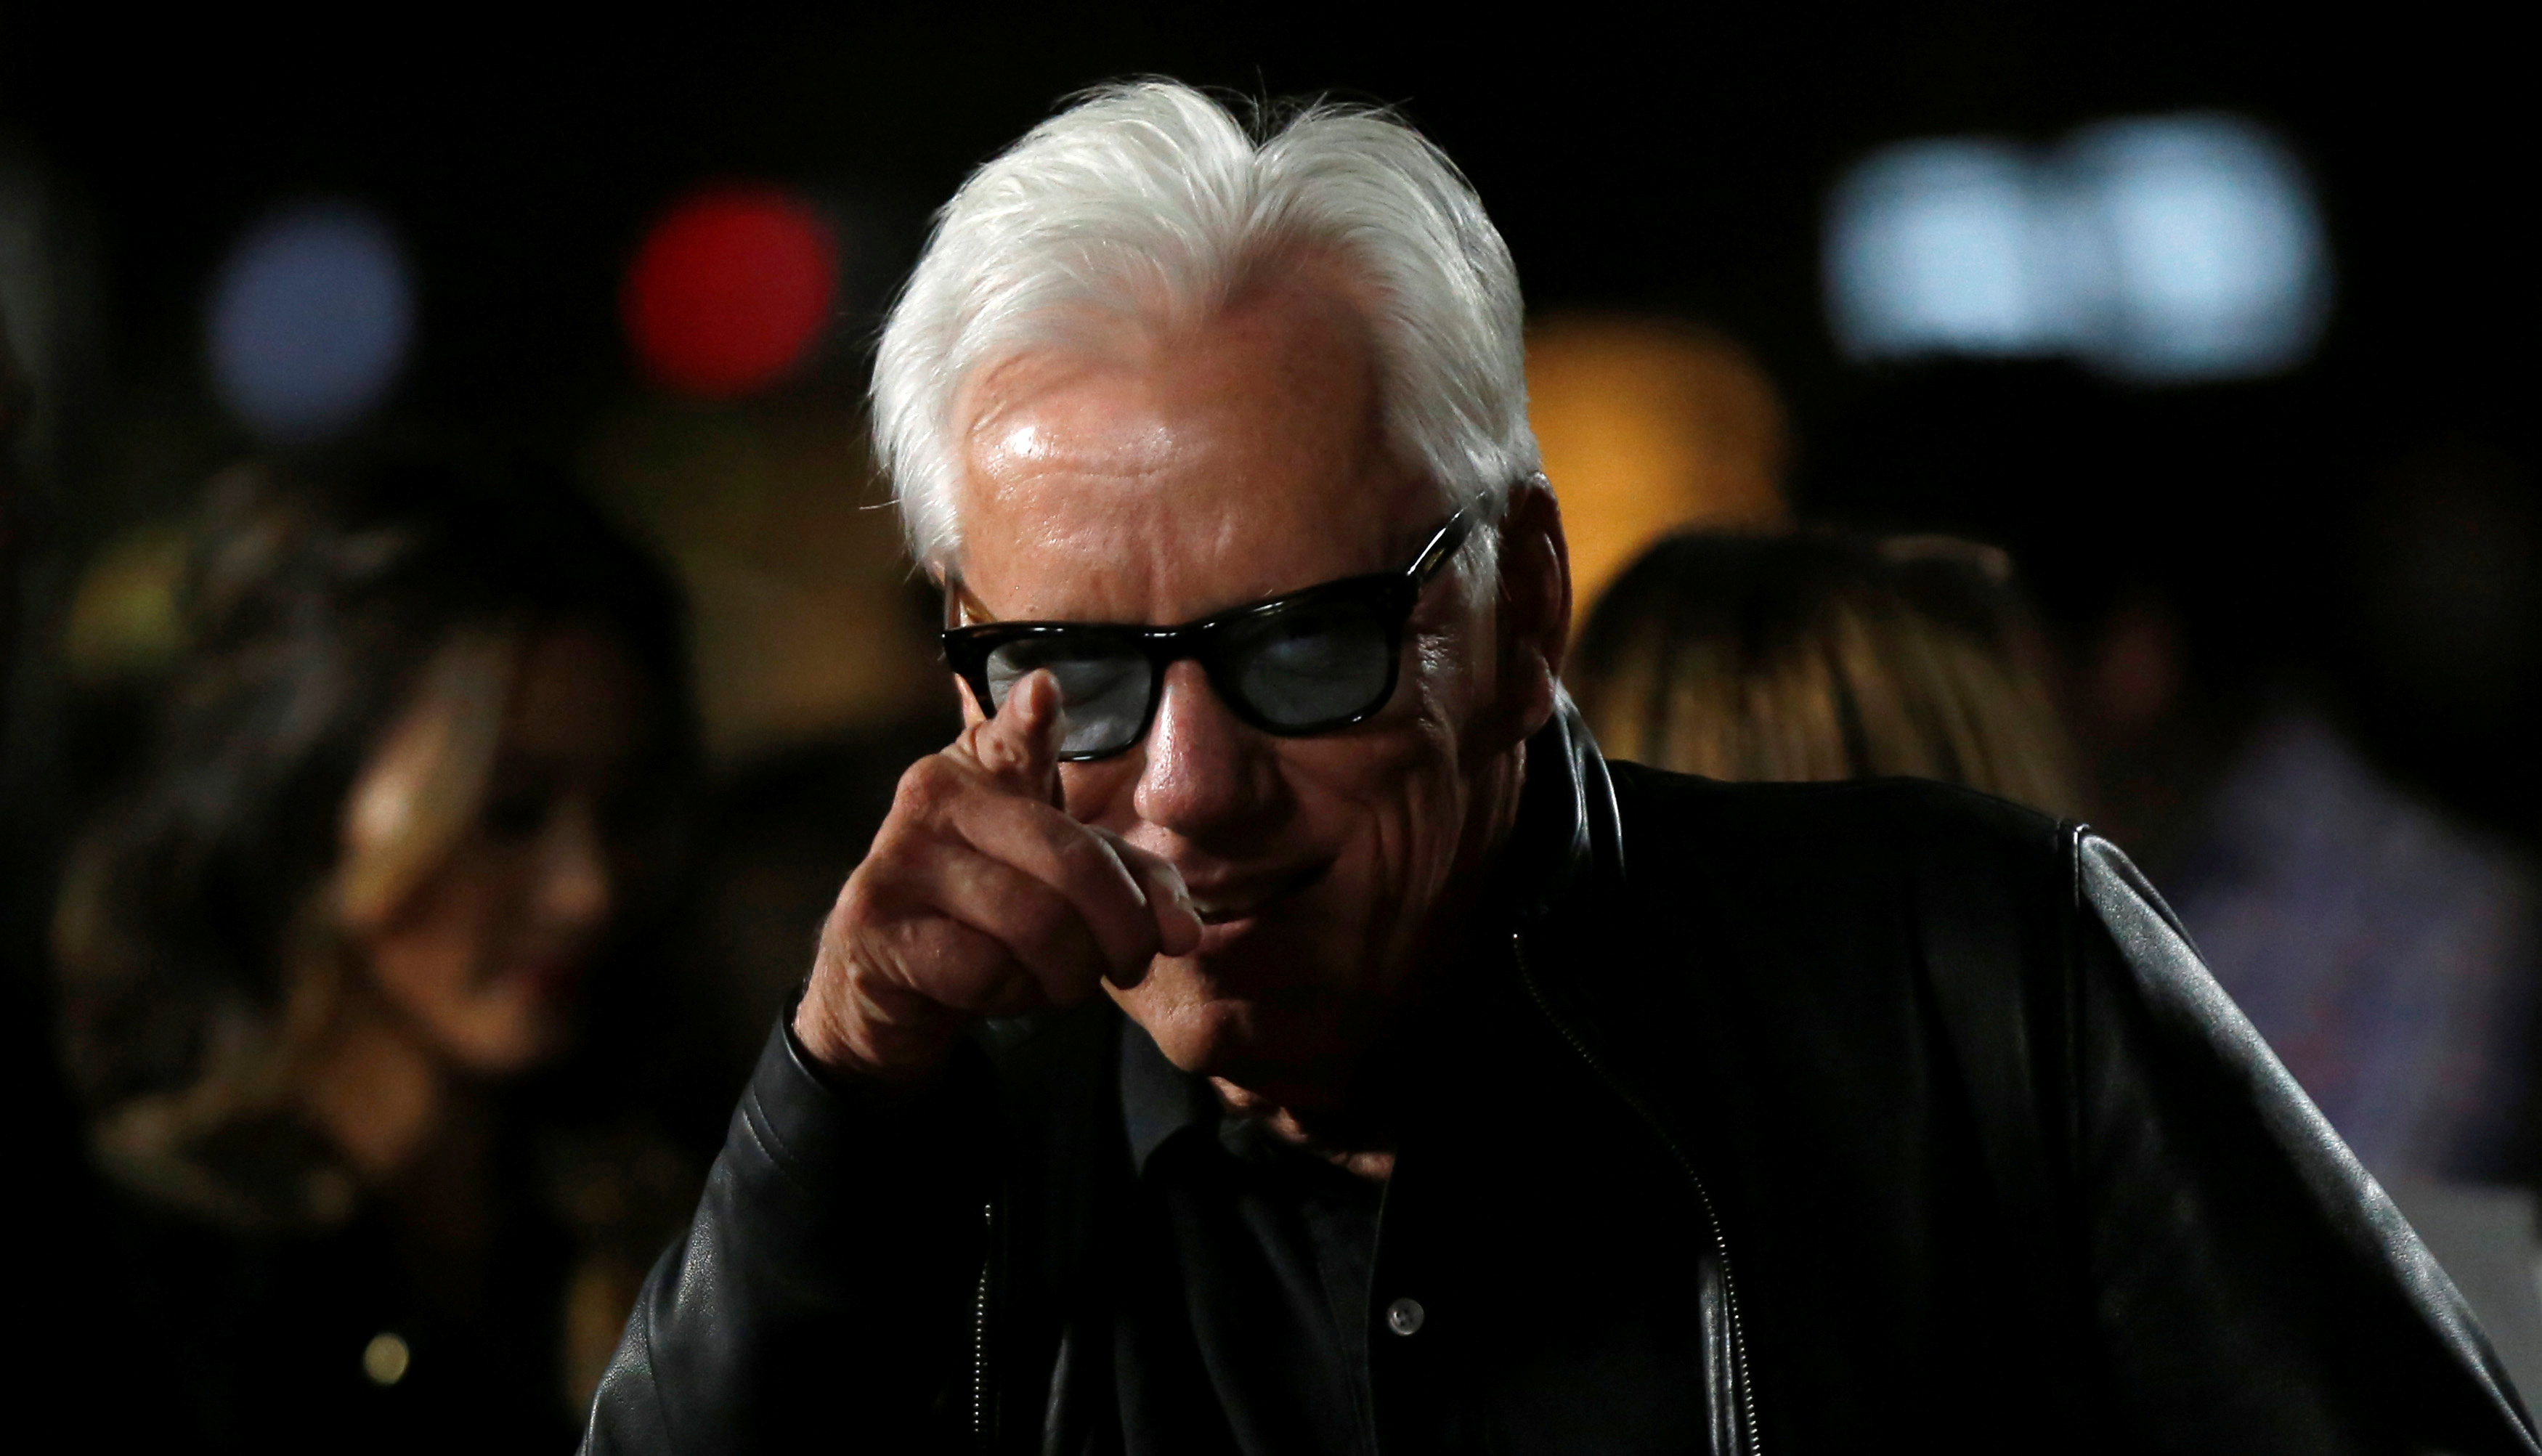 Actor James Woods poses at the premiere of "Bleed for This" in Beverly Hills, California U.S., November 2, 2016. REUTERS/Mario Anzuoni